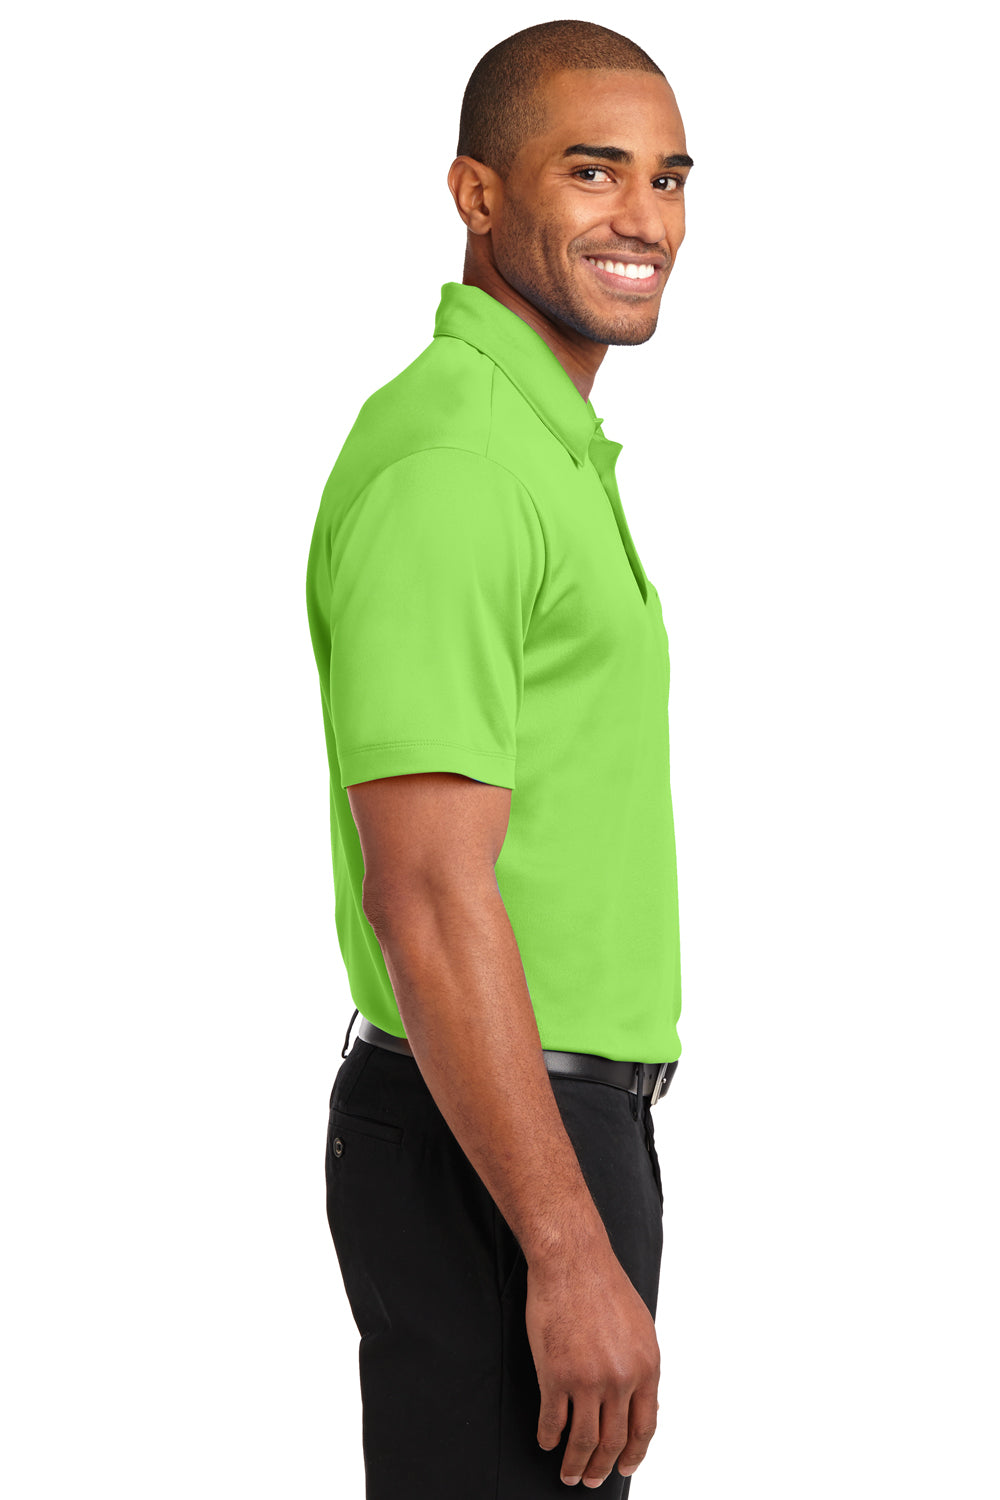 Port Authority K540P Mens Silk Touch Performance Moisture Wicking Short Sleeve Polo Shirt w/ Pocket Lime Green Side